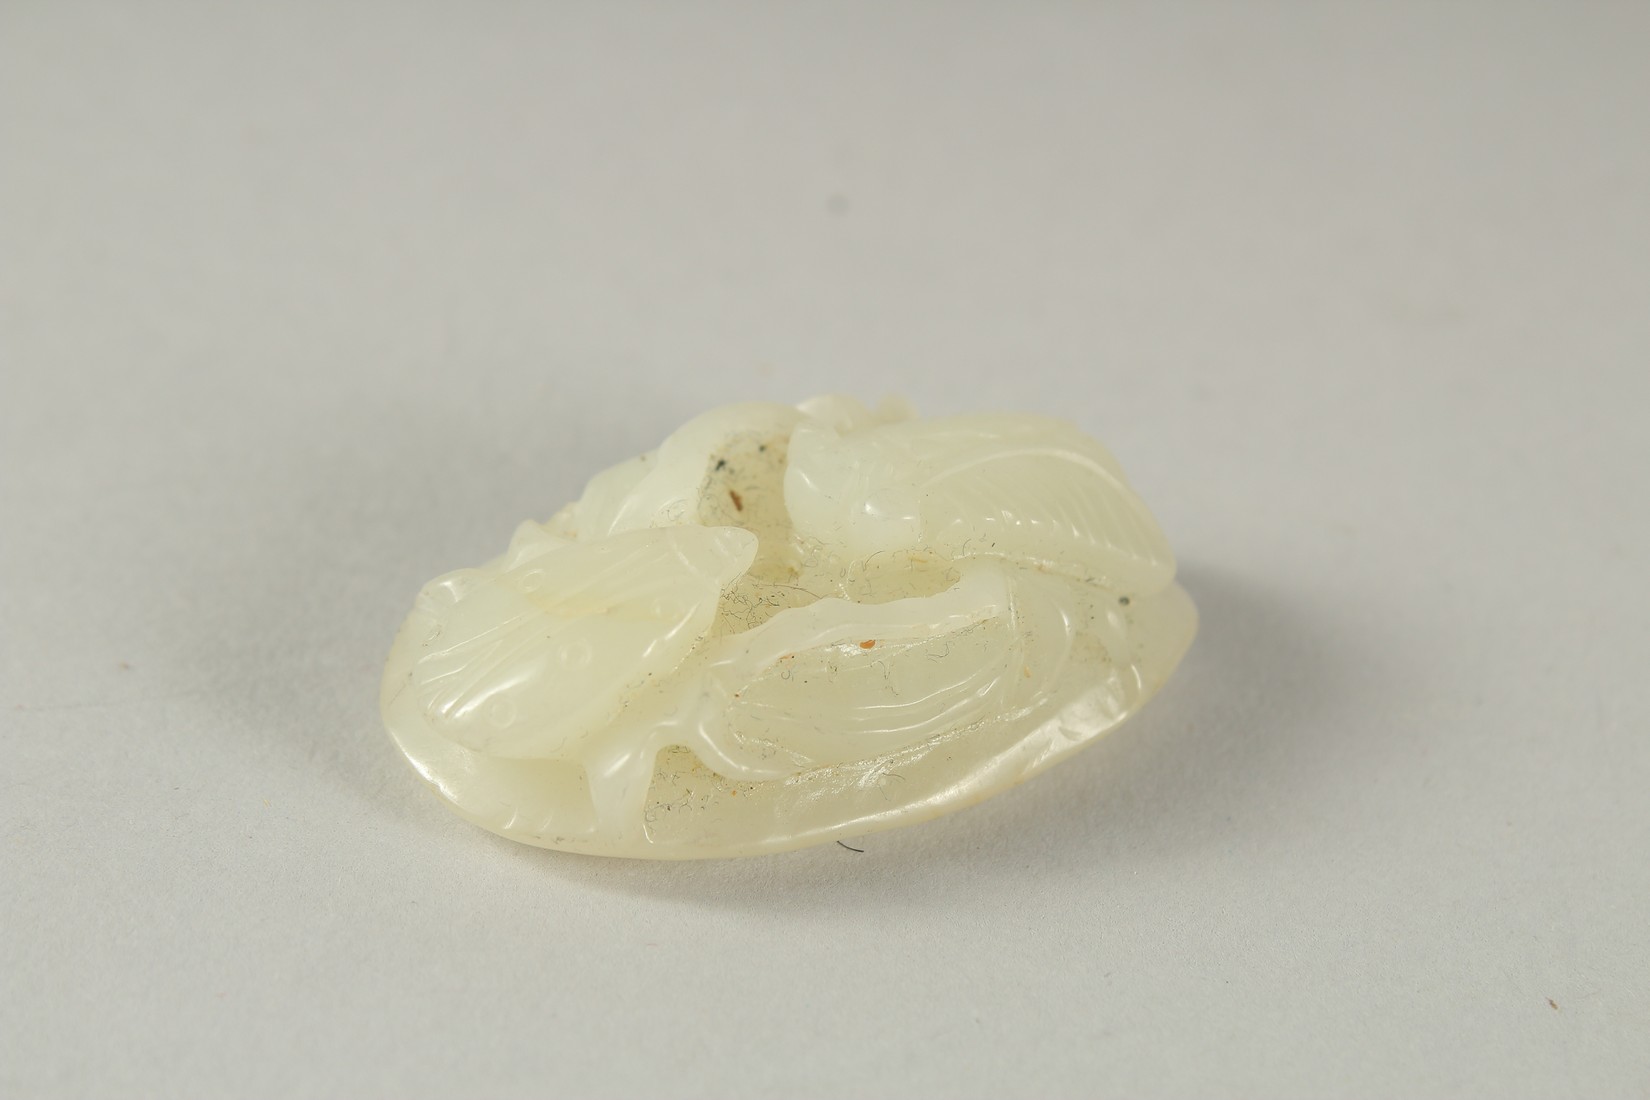 A 19TH CENTURY CHINESE CARVED JADE INSECT PENDANT, 4.5cm x 2.5cm.